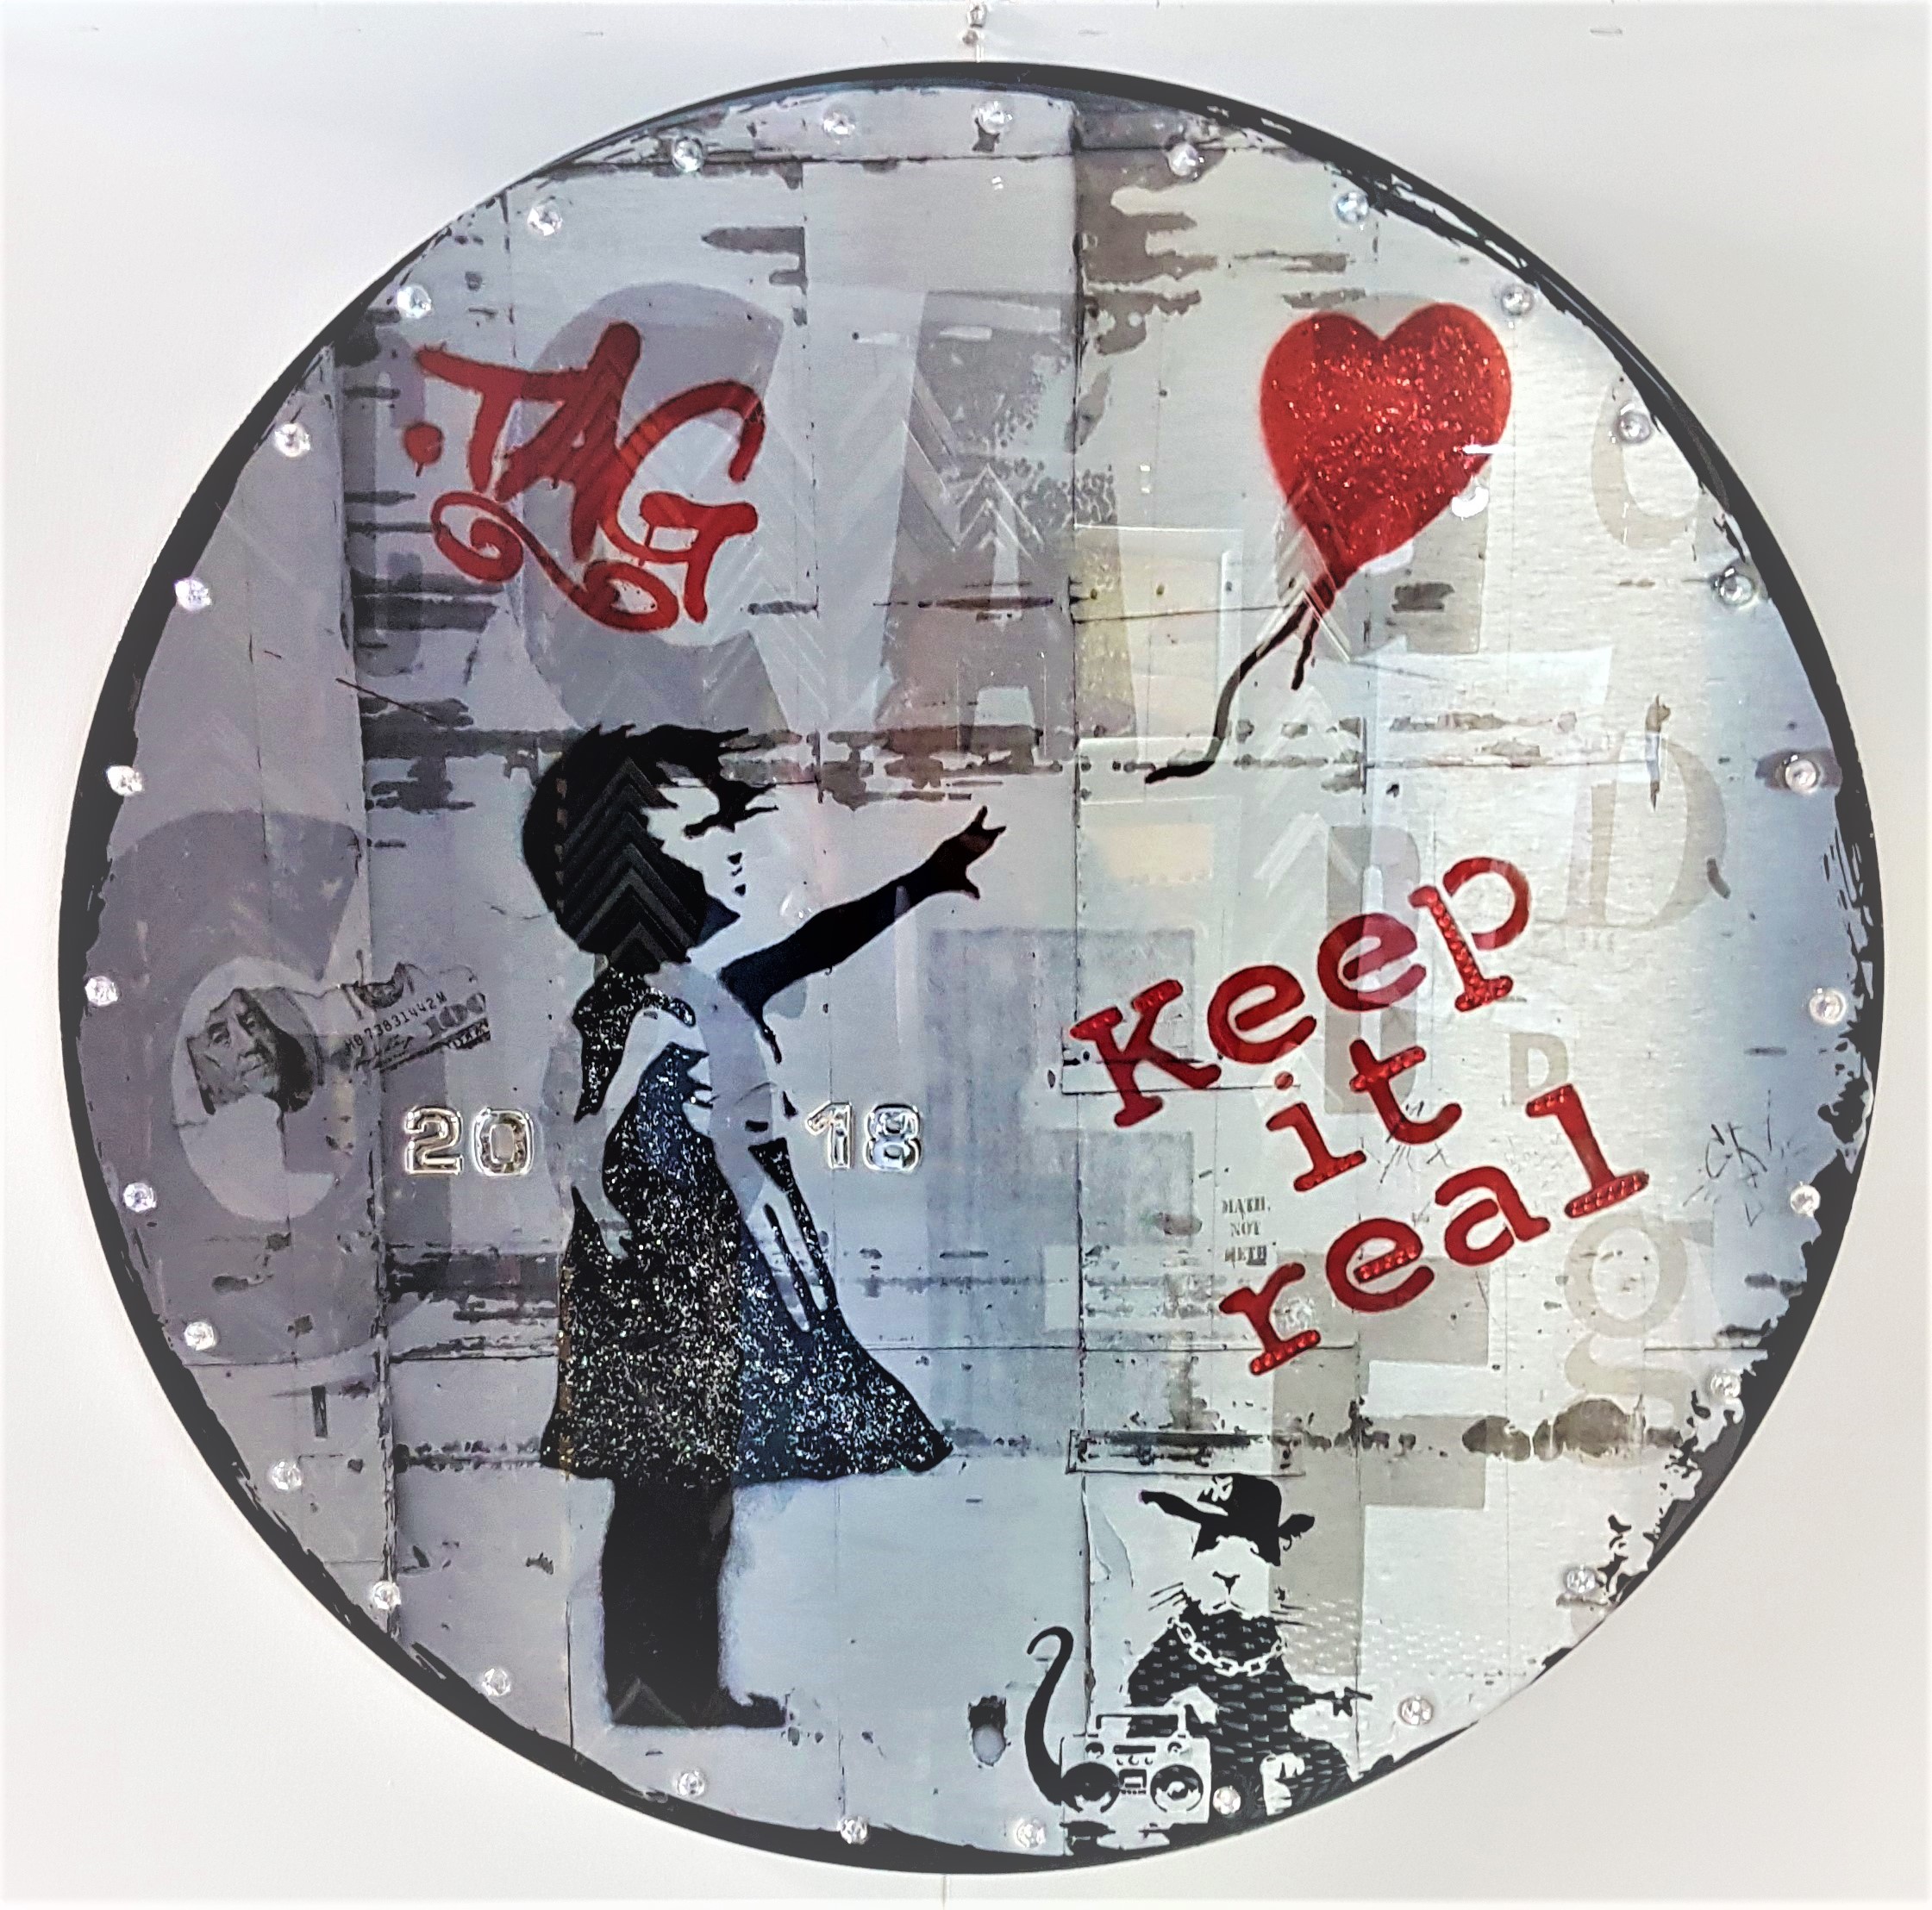 Keep it real - Hommage an Banksy